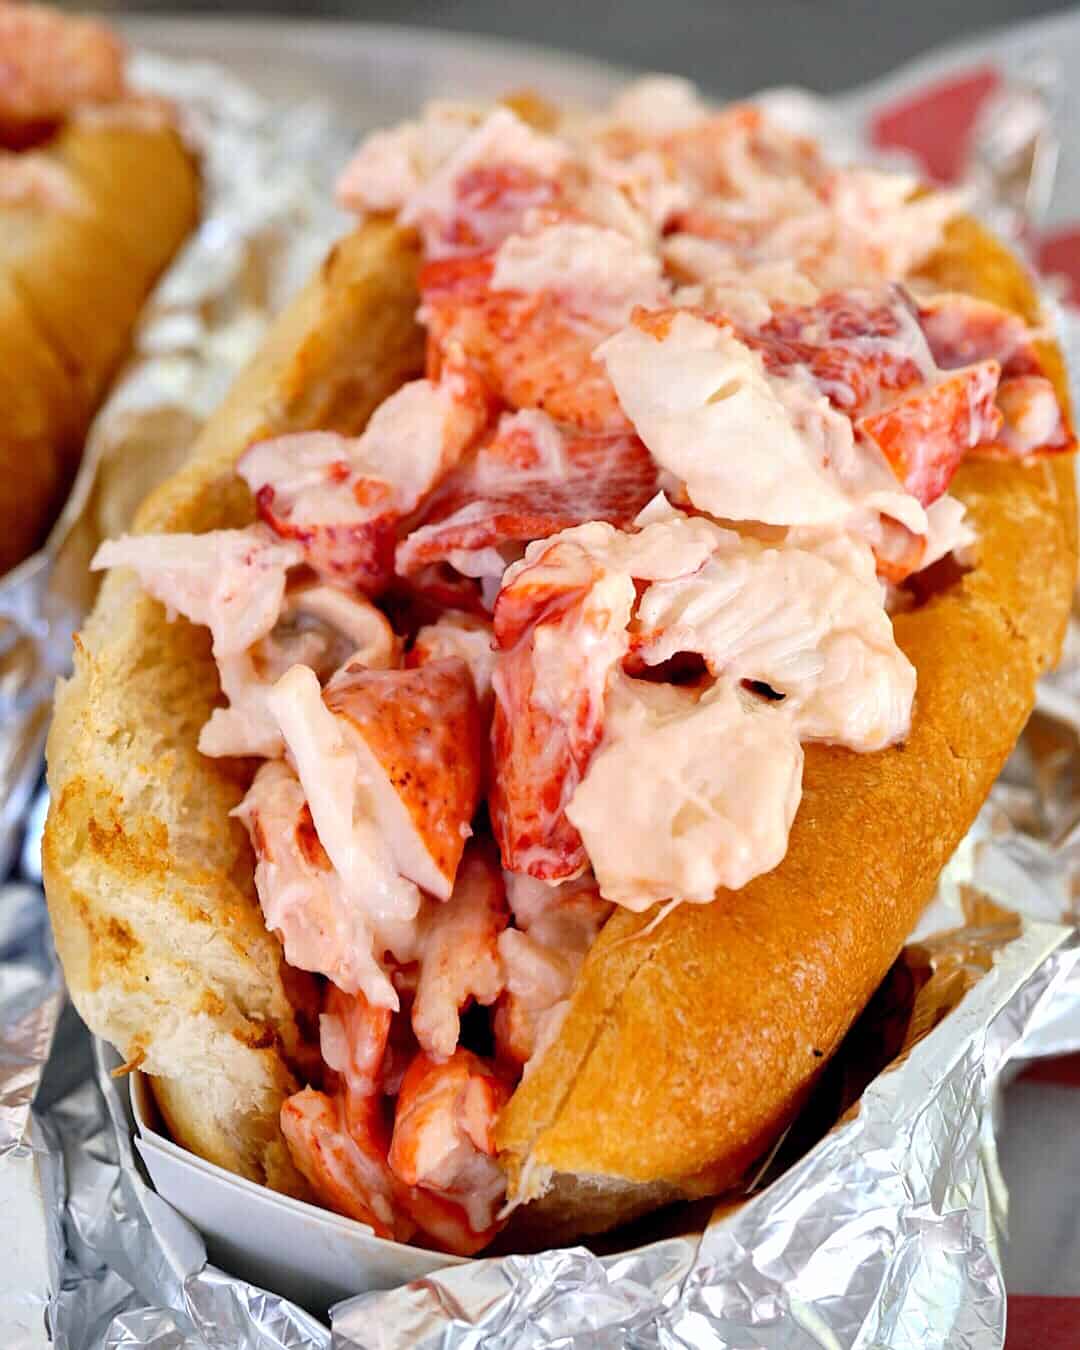 If you're looking for the best lobster roll in Boston, add James Hook Lobster Co to the list! It's packed with large chunks of fresh lobster meat.